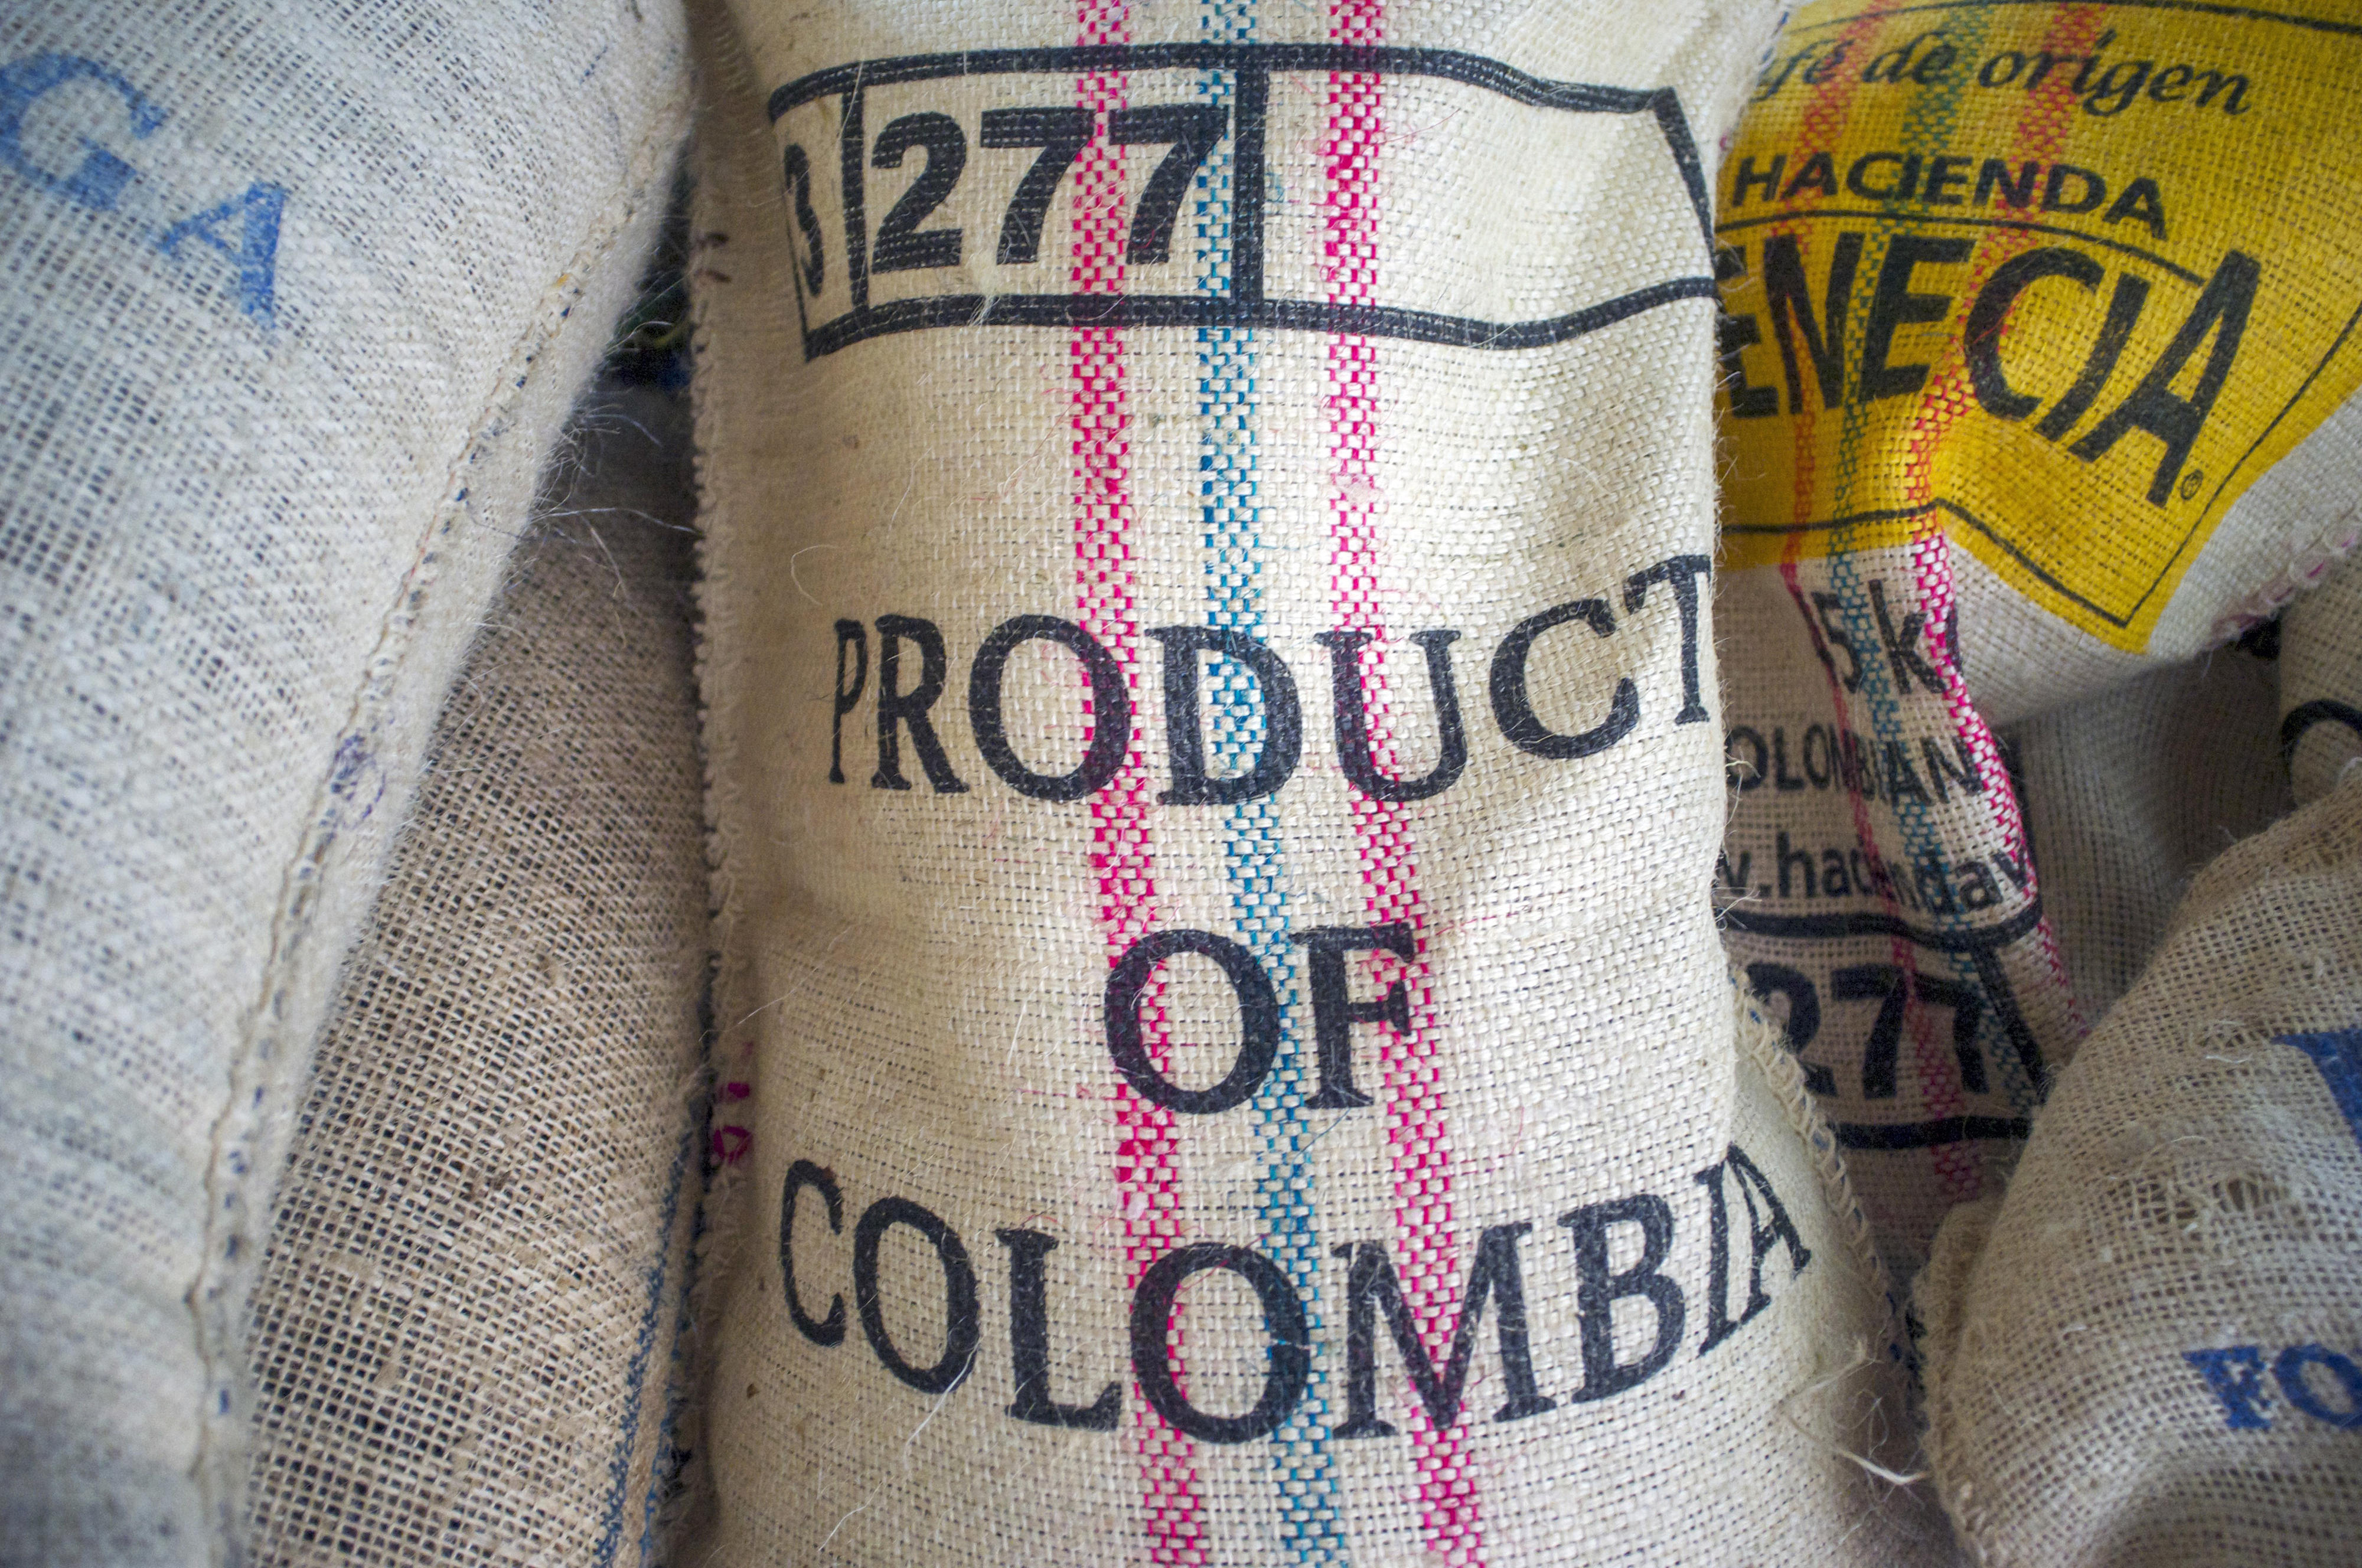 Coffee bags from Colombia